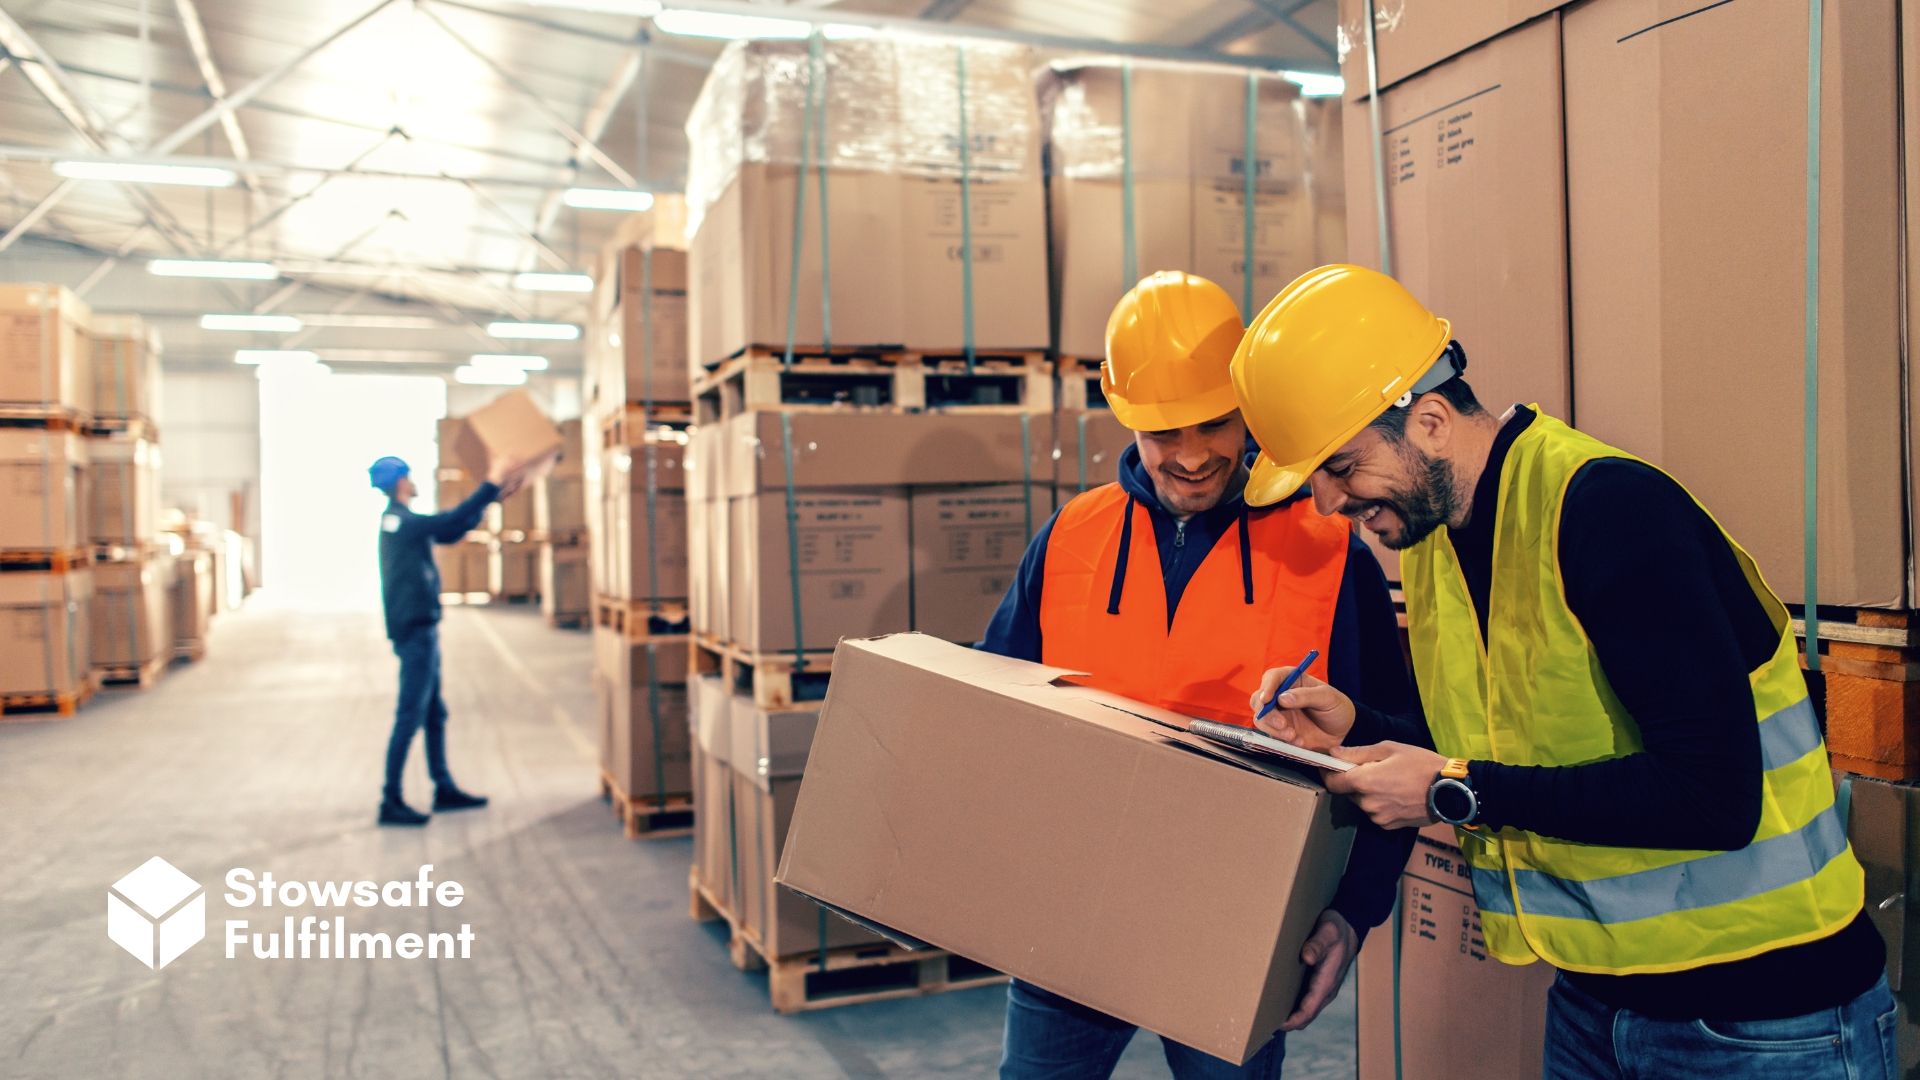 Do you need warehouse space to store your inventory? You've got choices. Learn about the different types of warehouse storage in our article.
